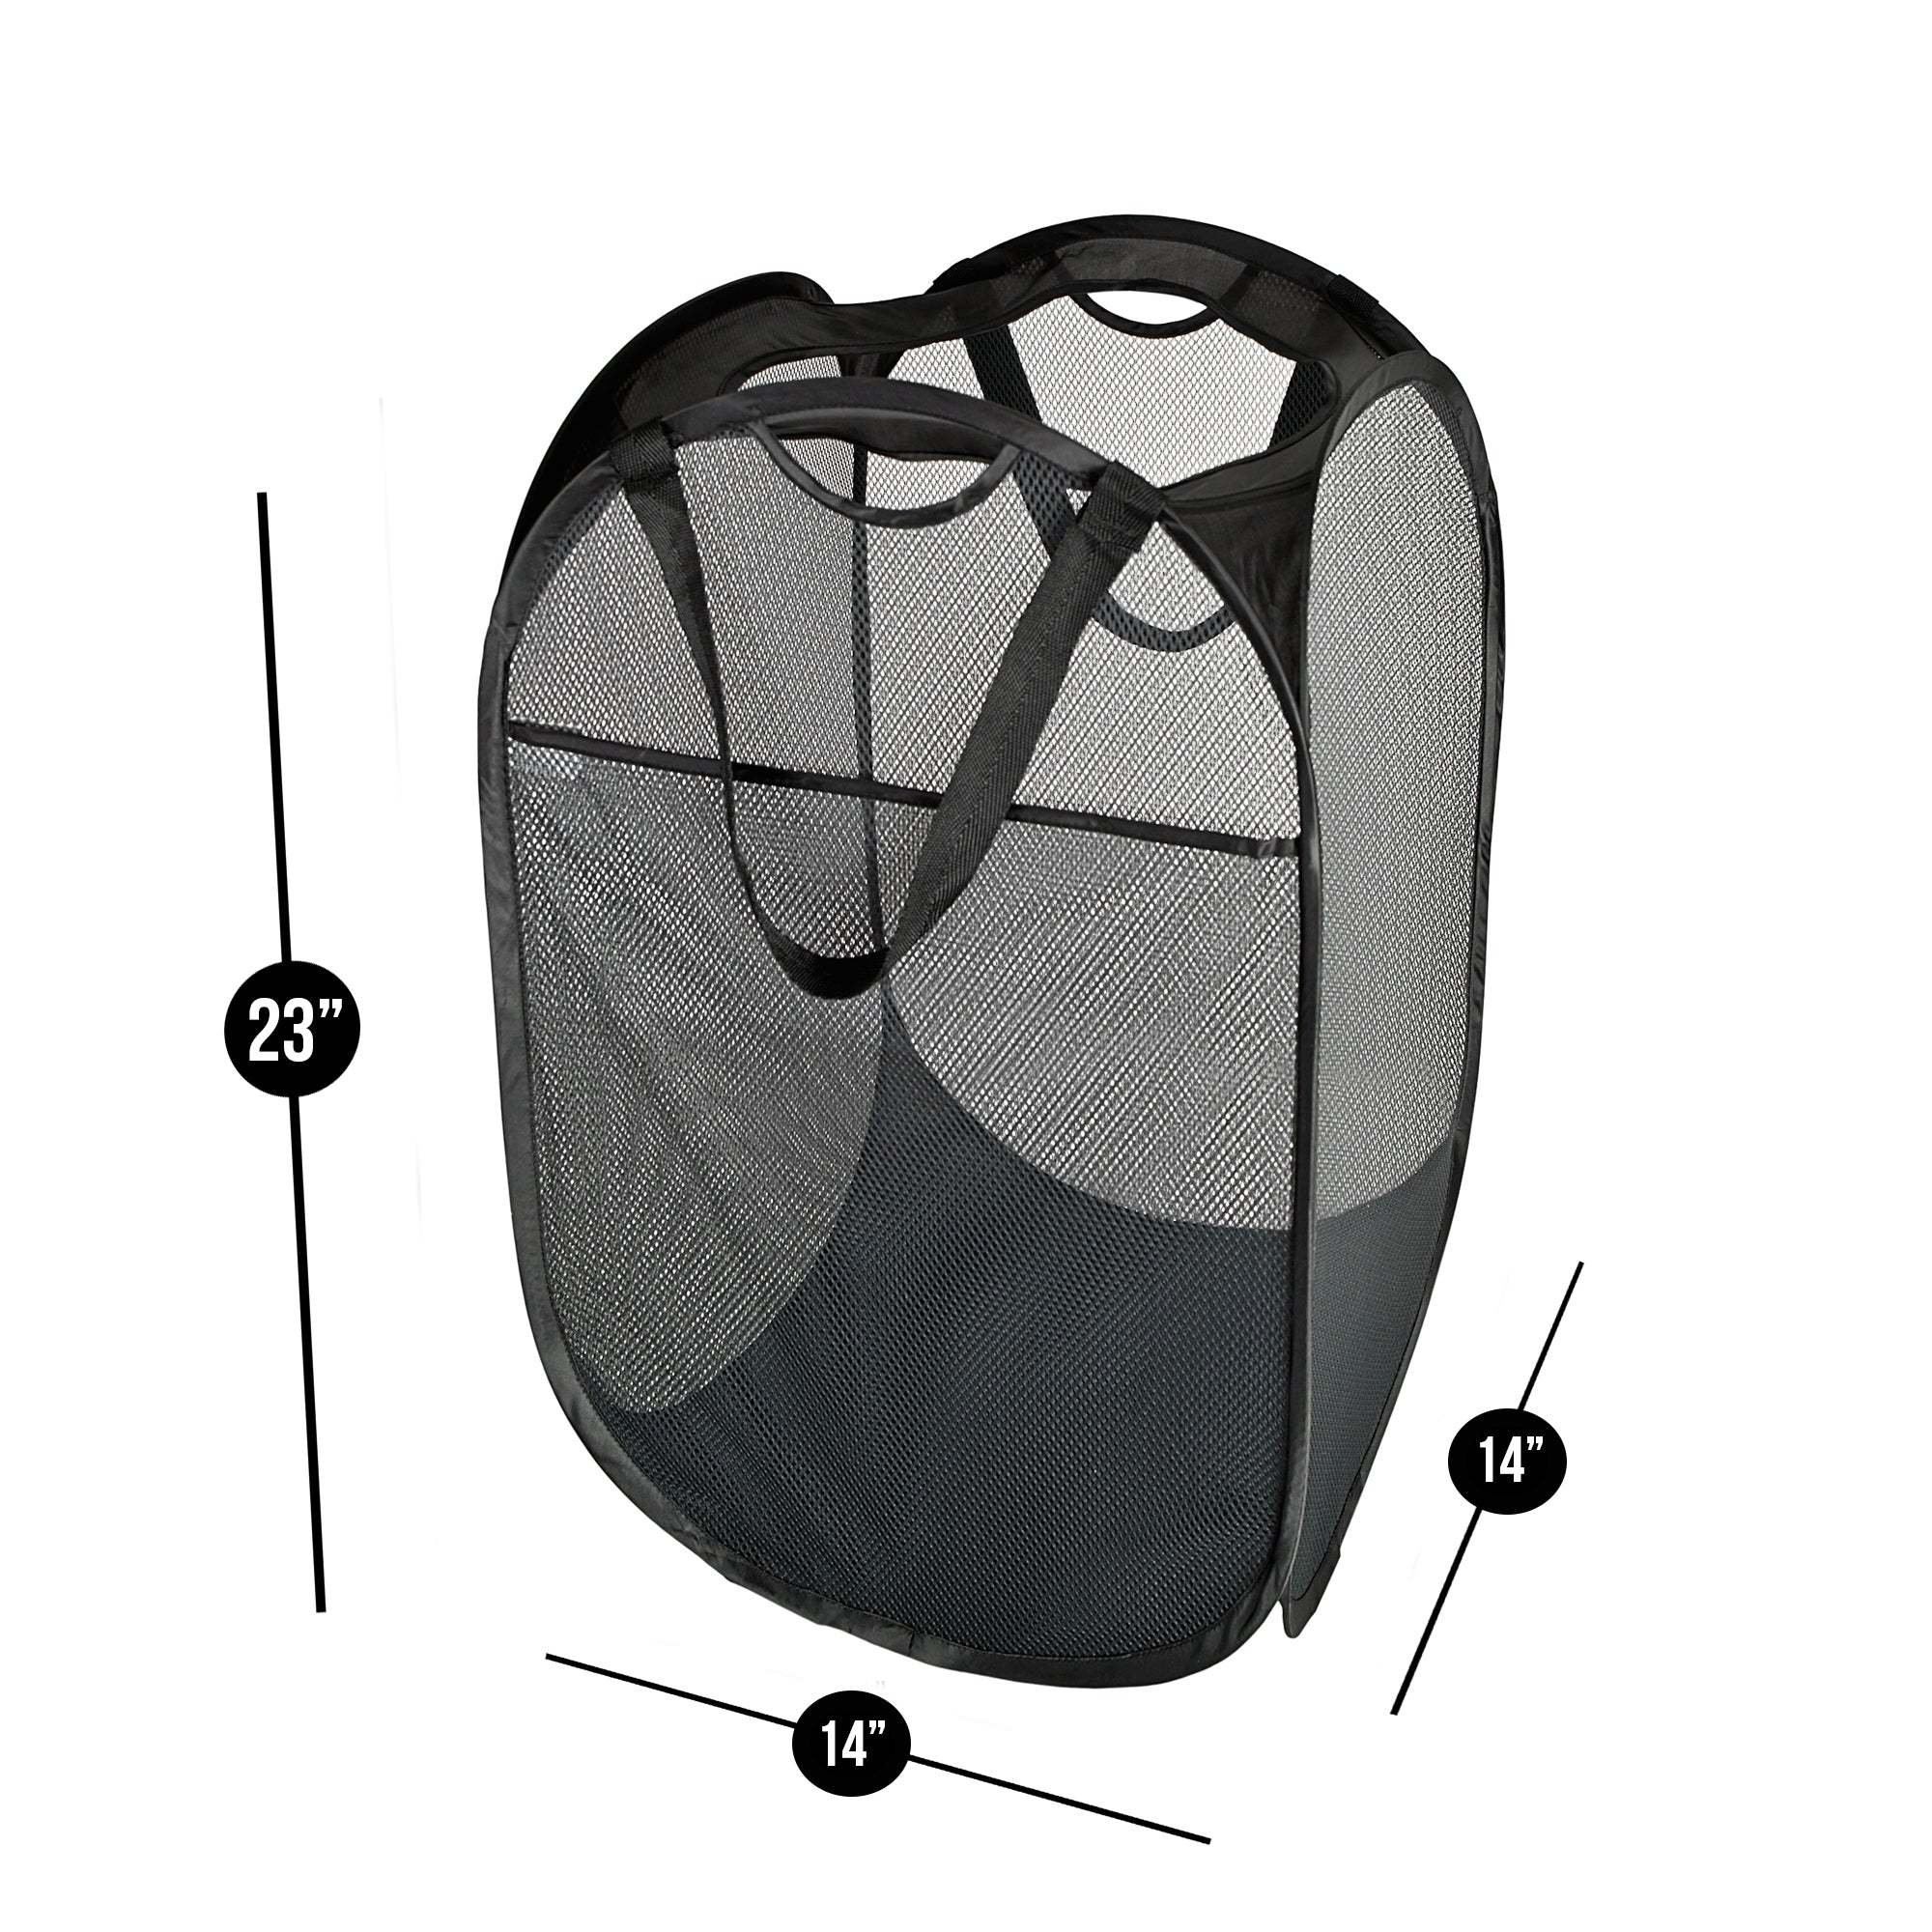 Deluxe Mesh Pop Up Square Laundry Hamper with Side Pocket and Handles - VentilAir Fabric - Collapsible Smart Design® 3